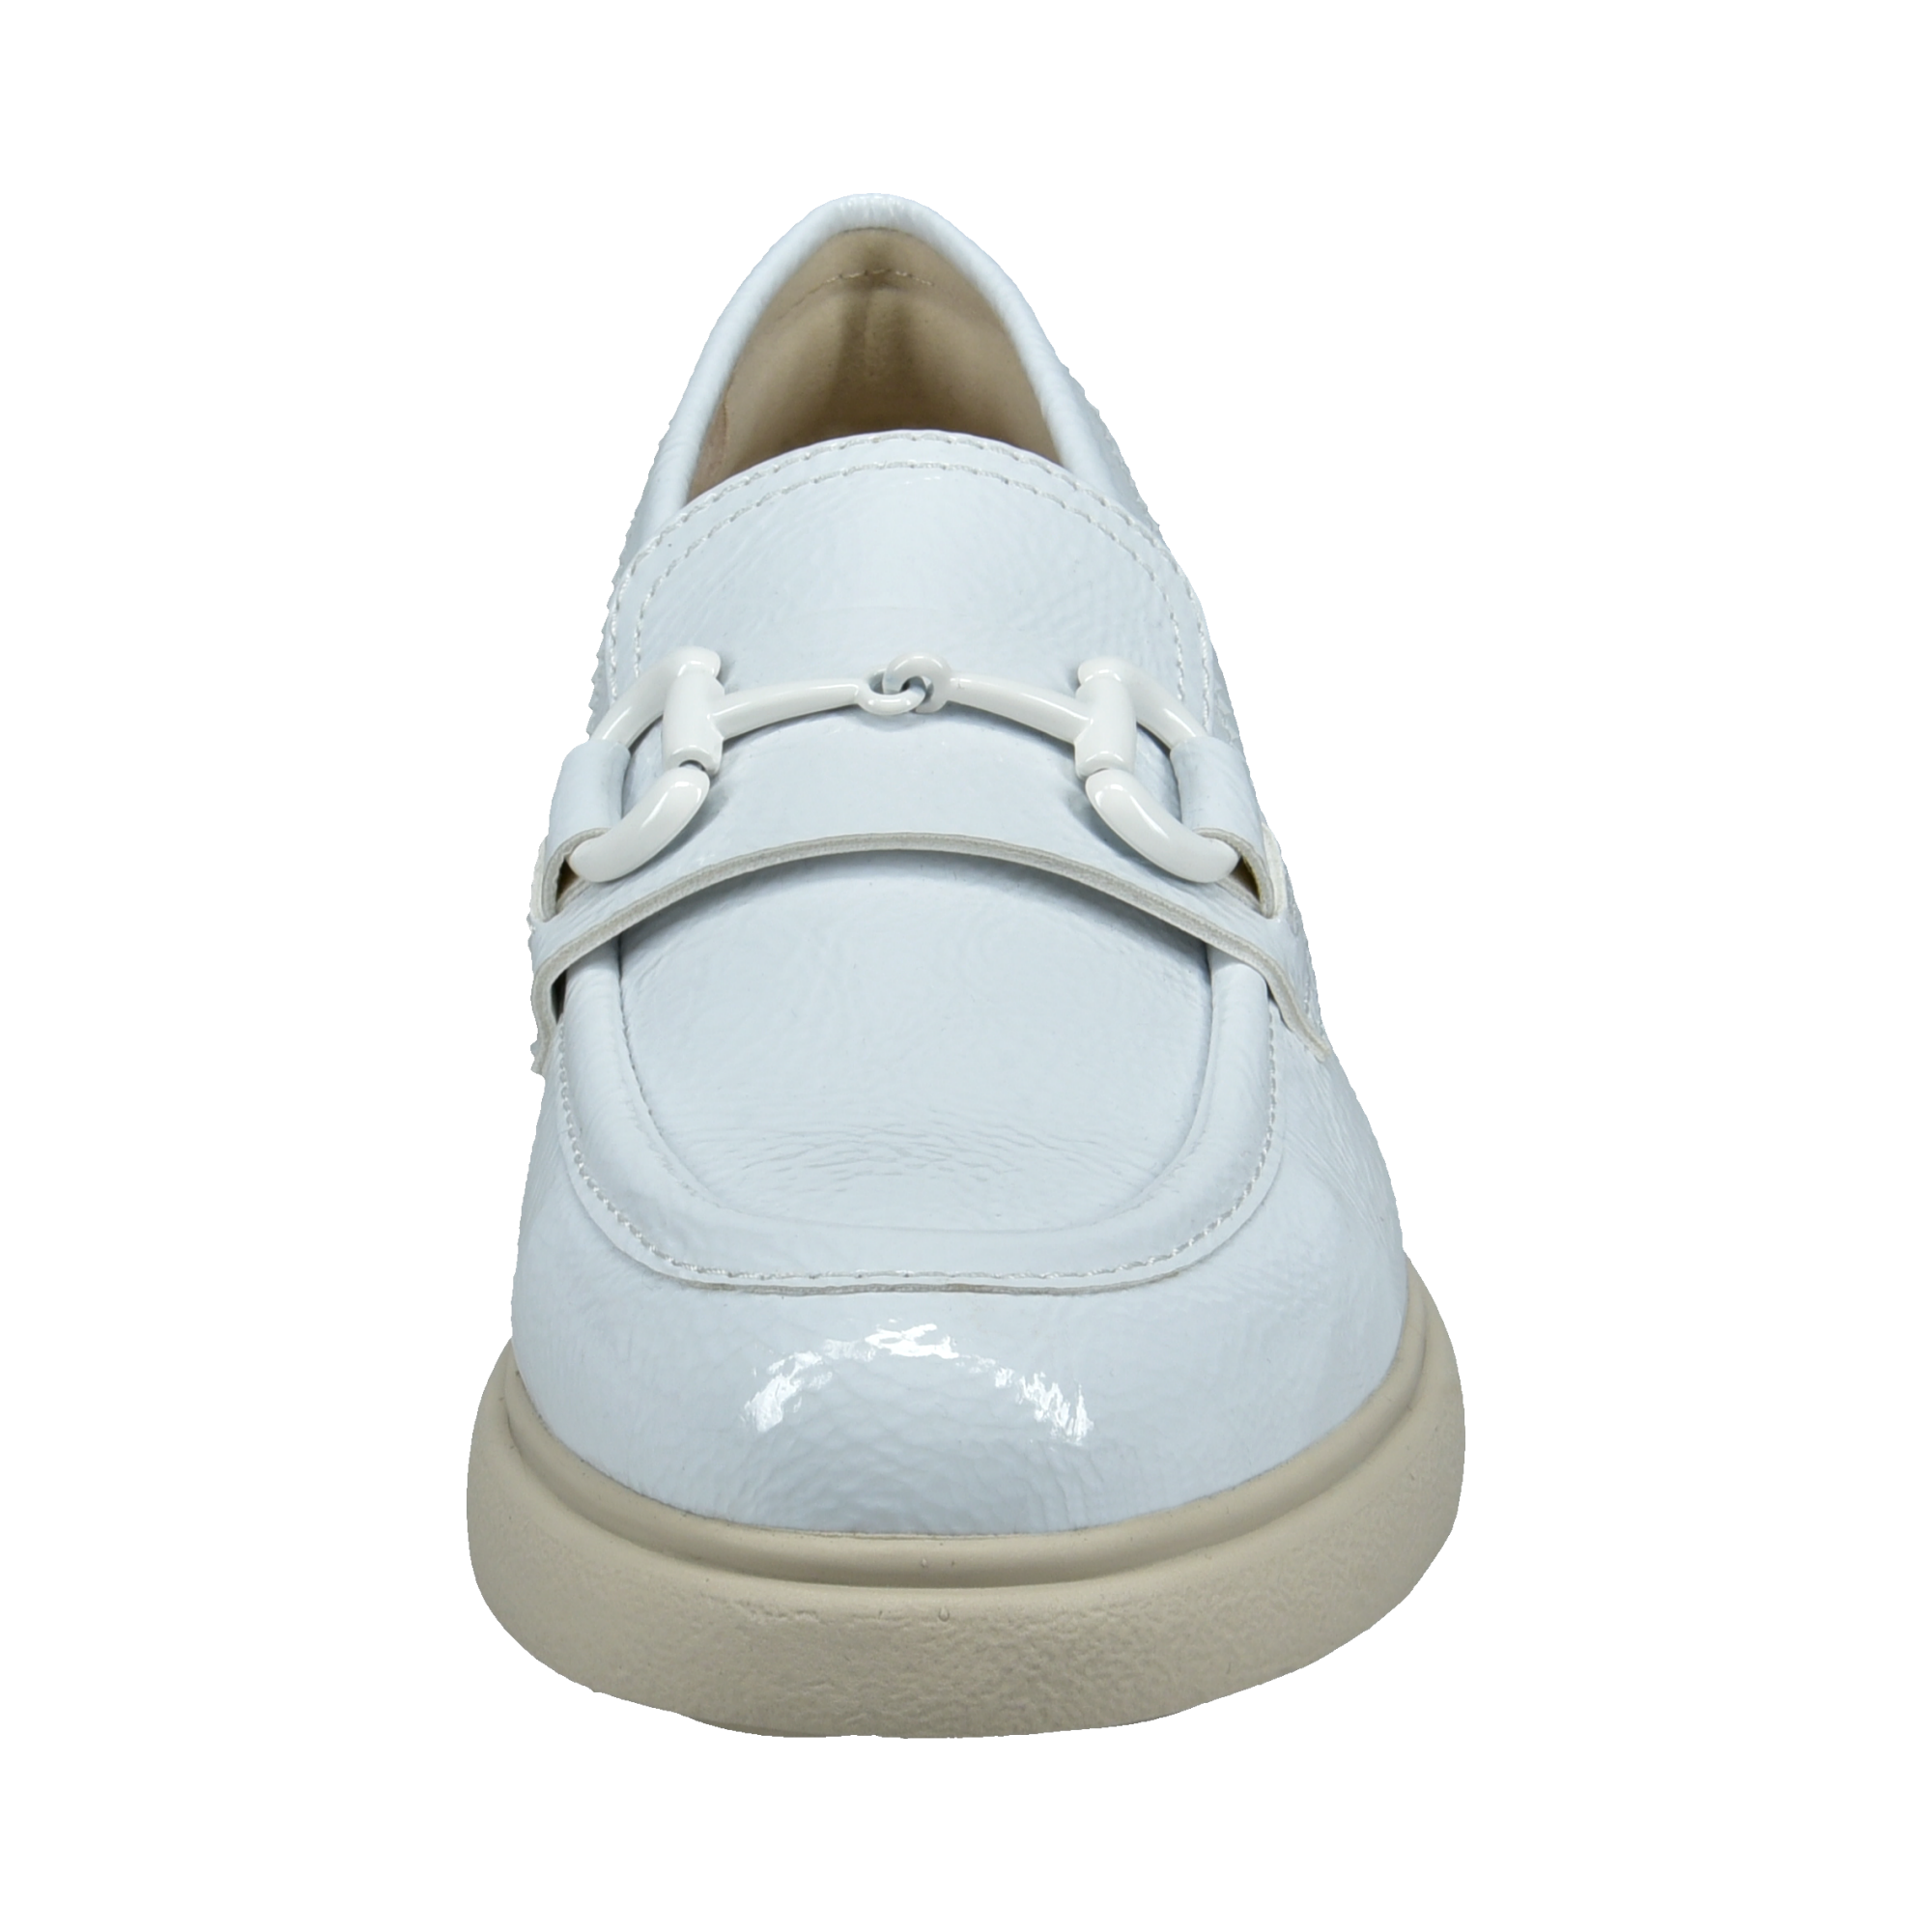 Loafers white